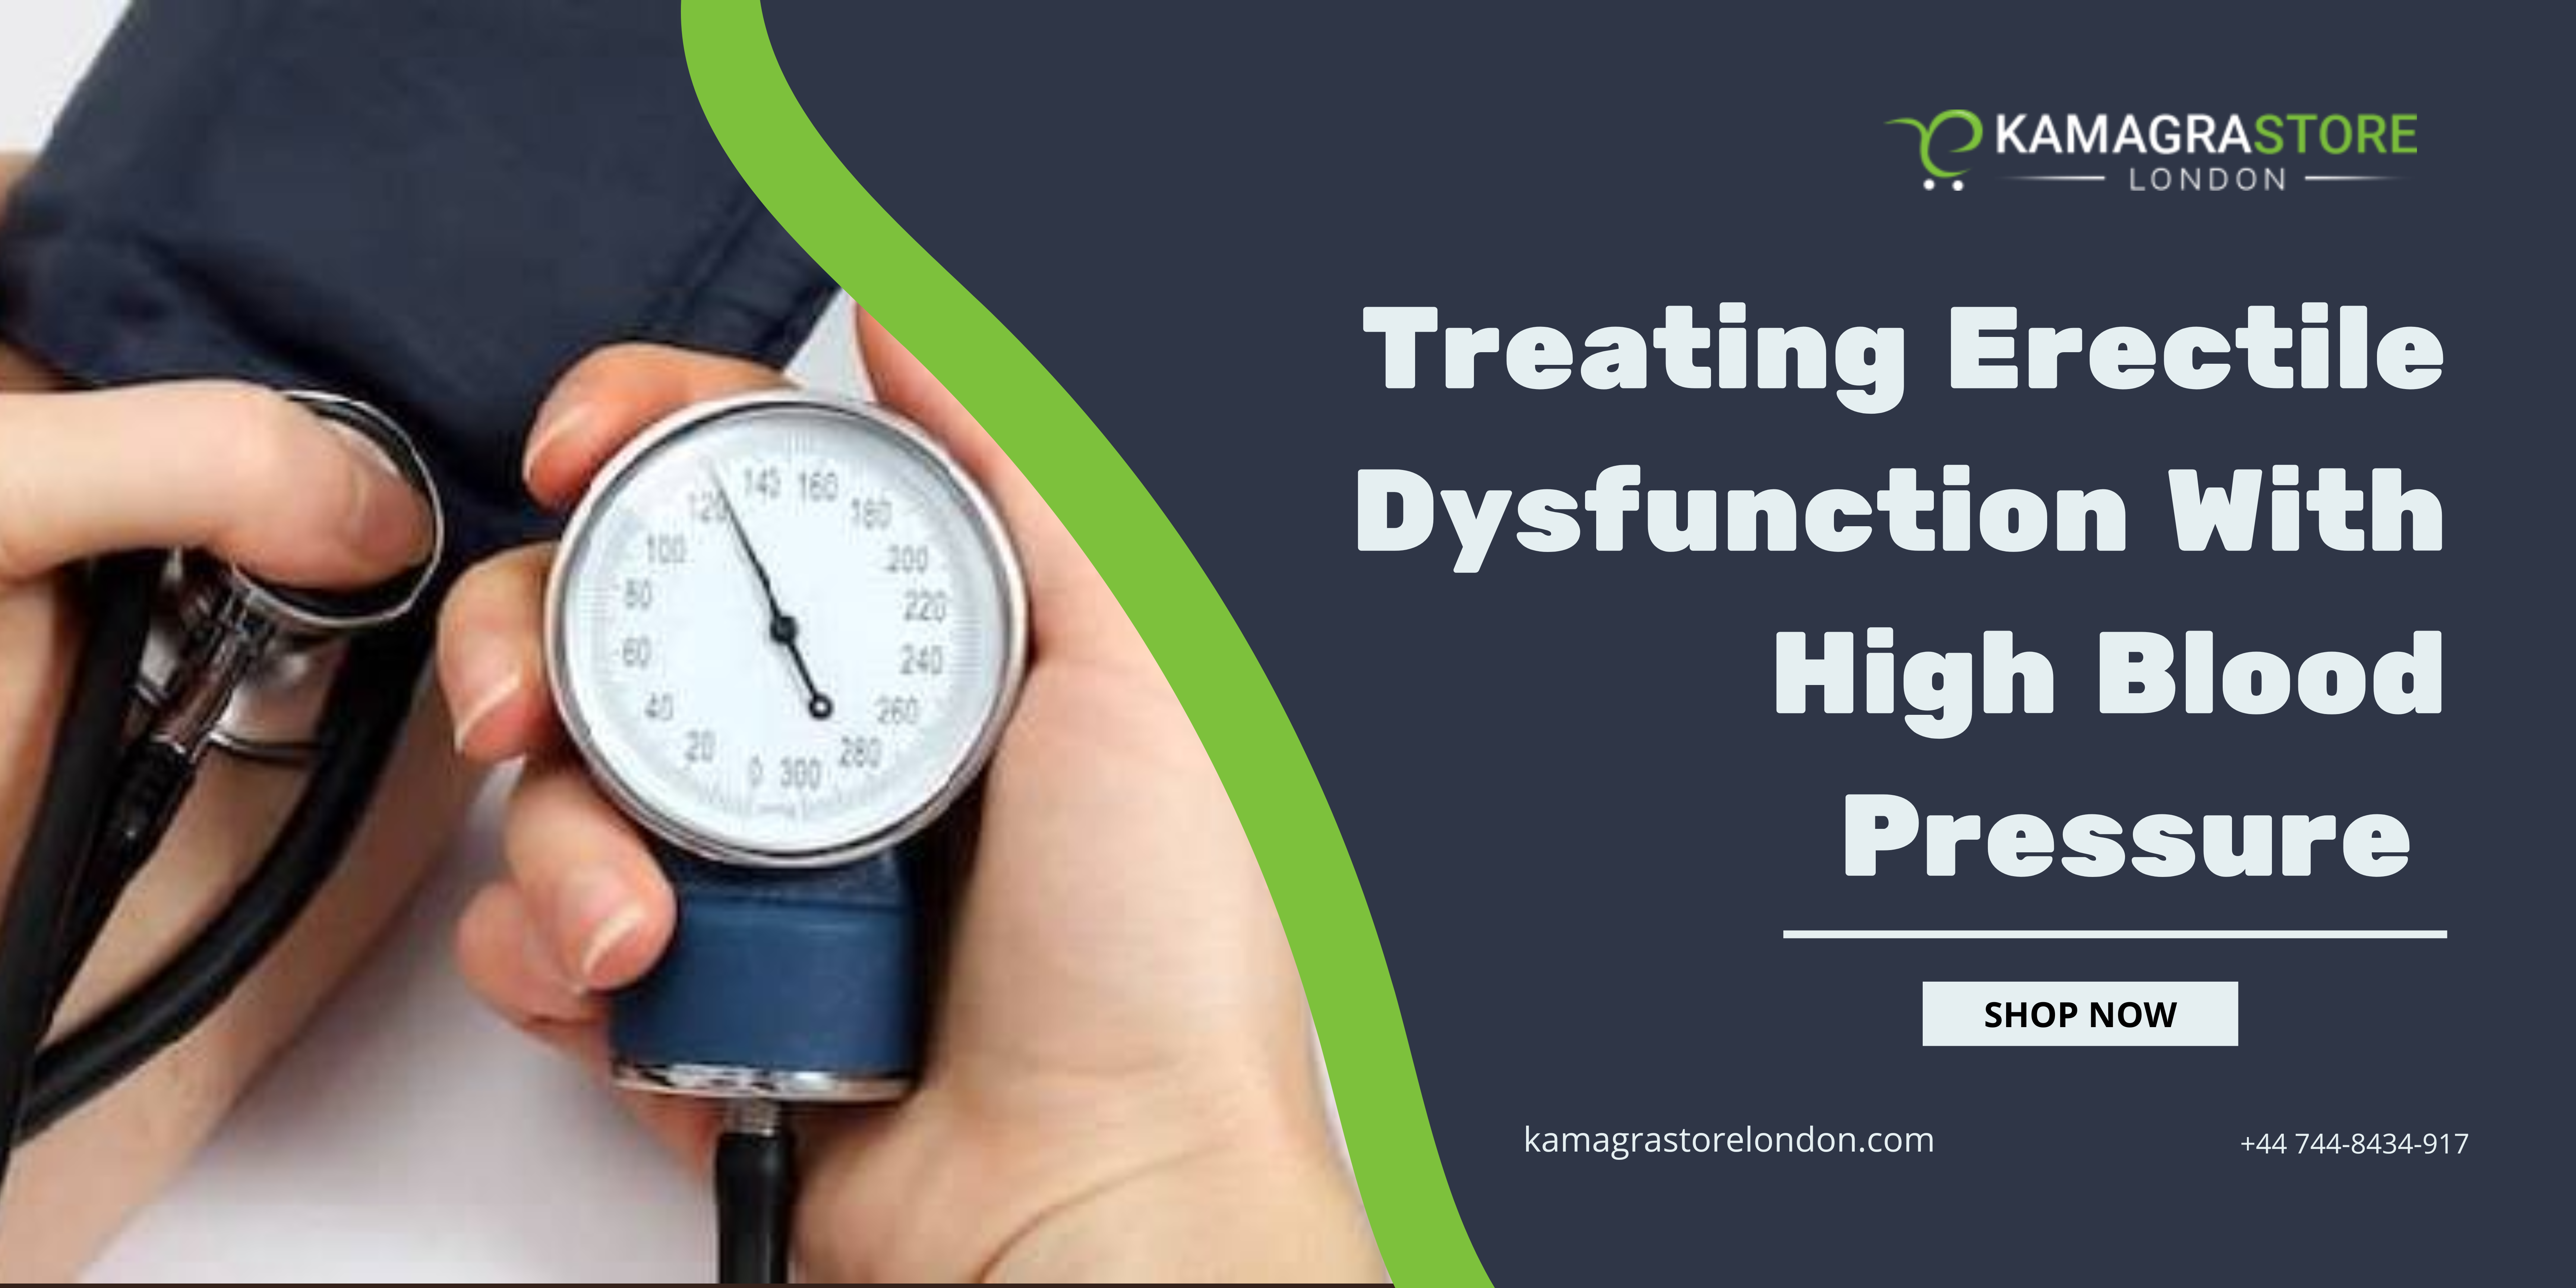 Treating Erectile Dysfunction With High Blood Pressure